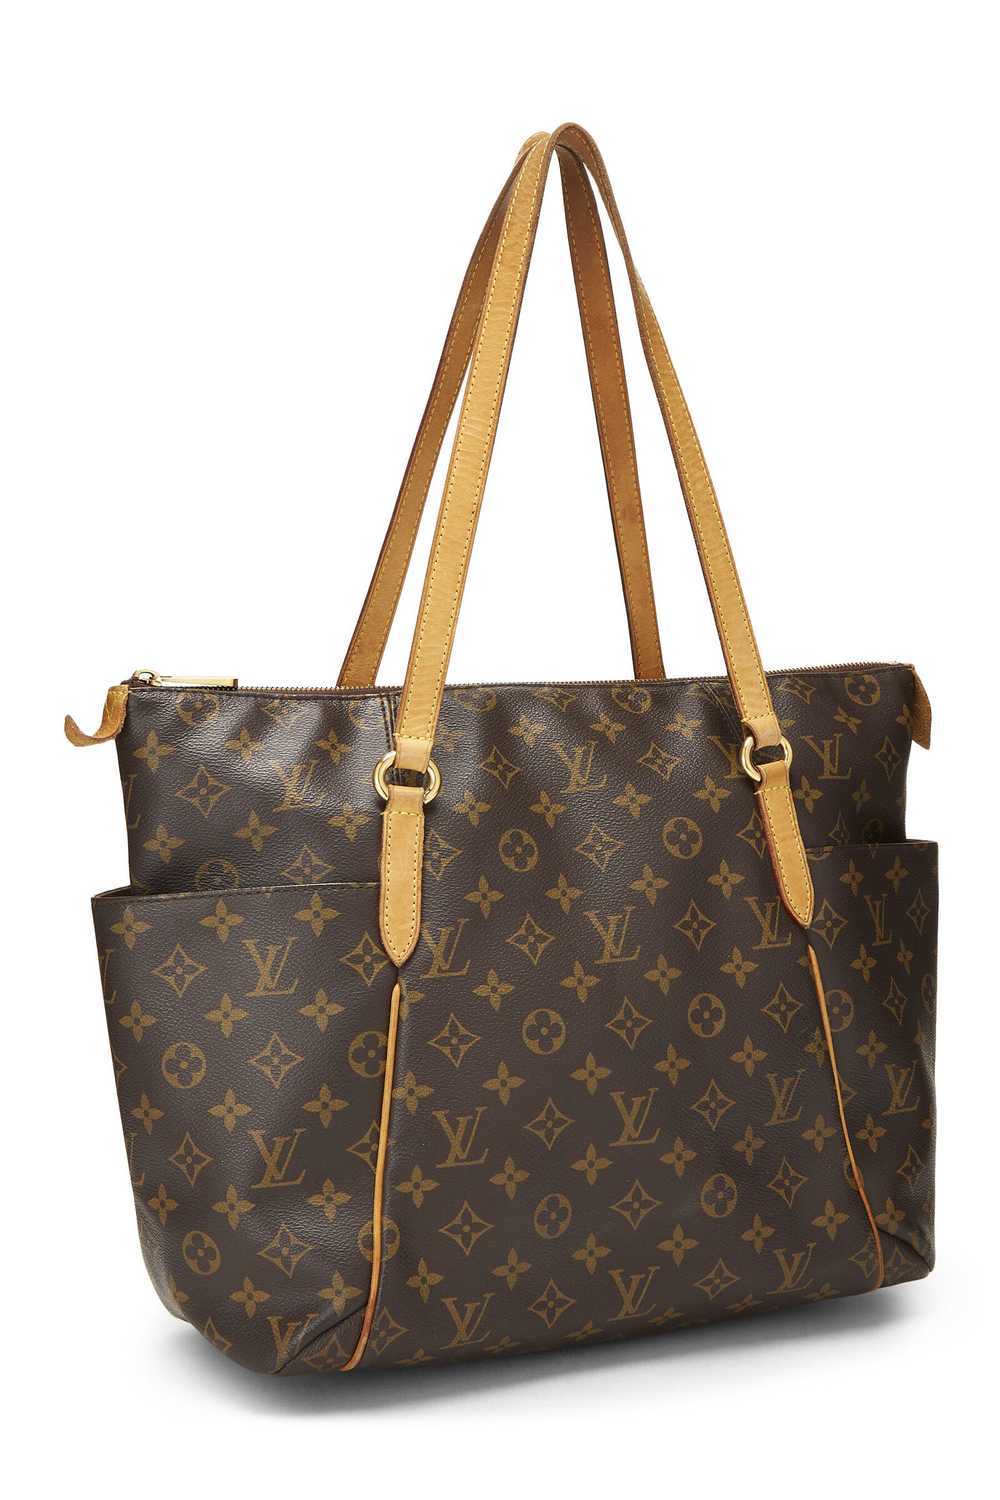 Monogram Canvas Totally MM - image 2